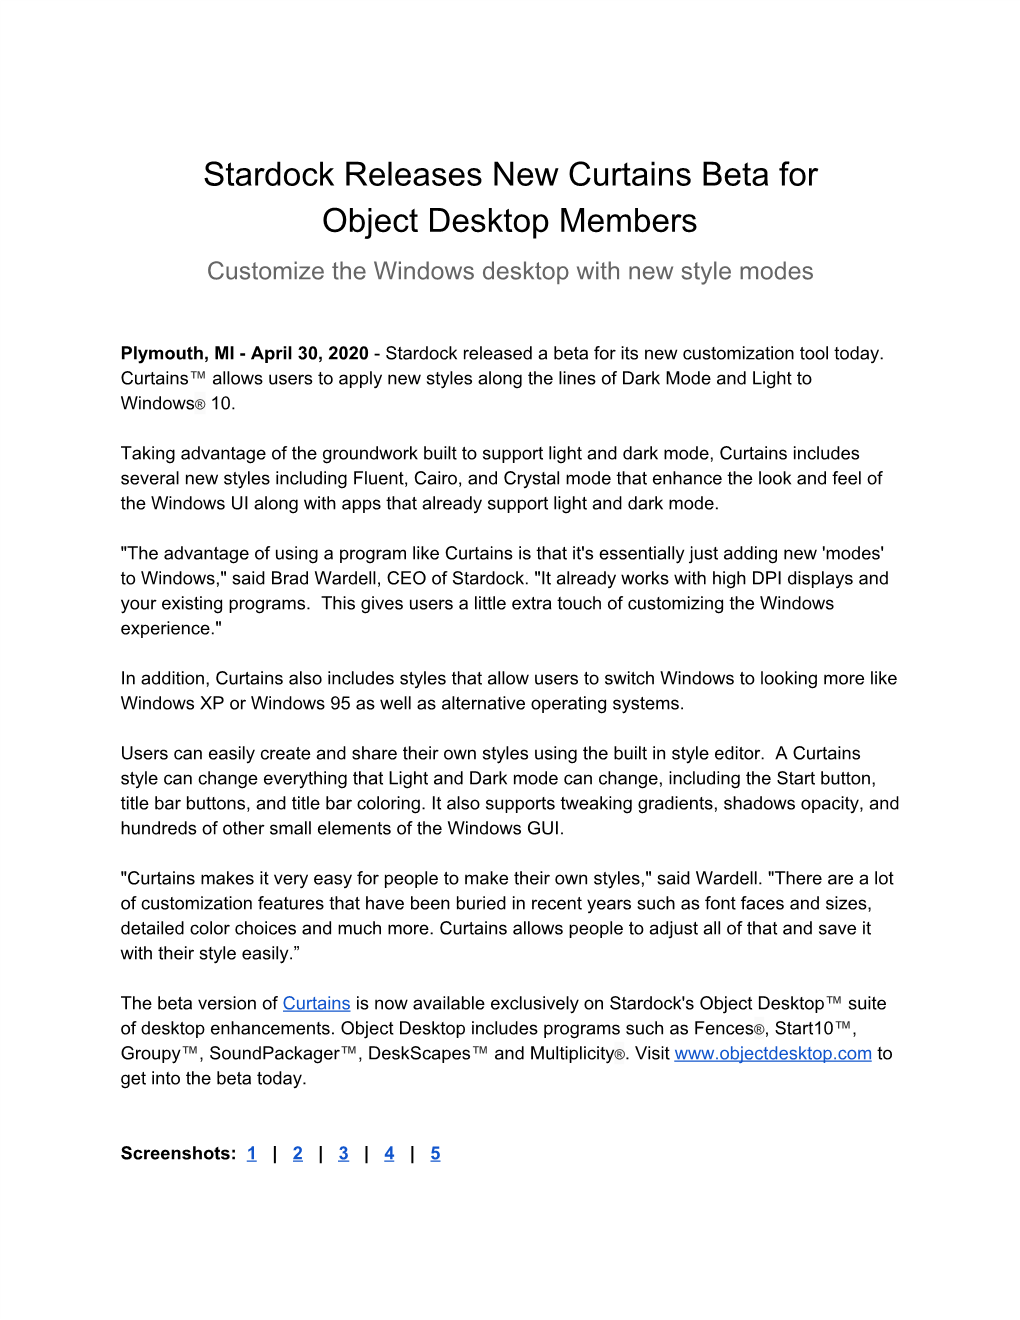 Stardock Releases New Curtains Beta for Object Desktop Members Customize the Windows Desktop with New Style Modes